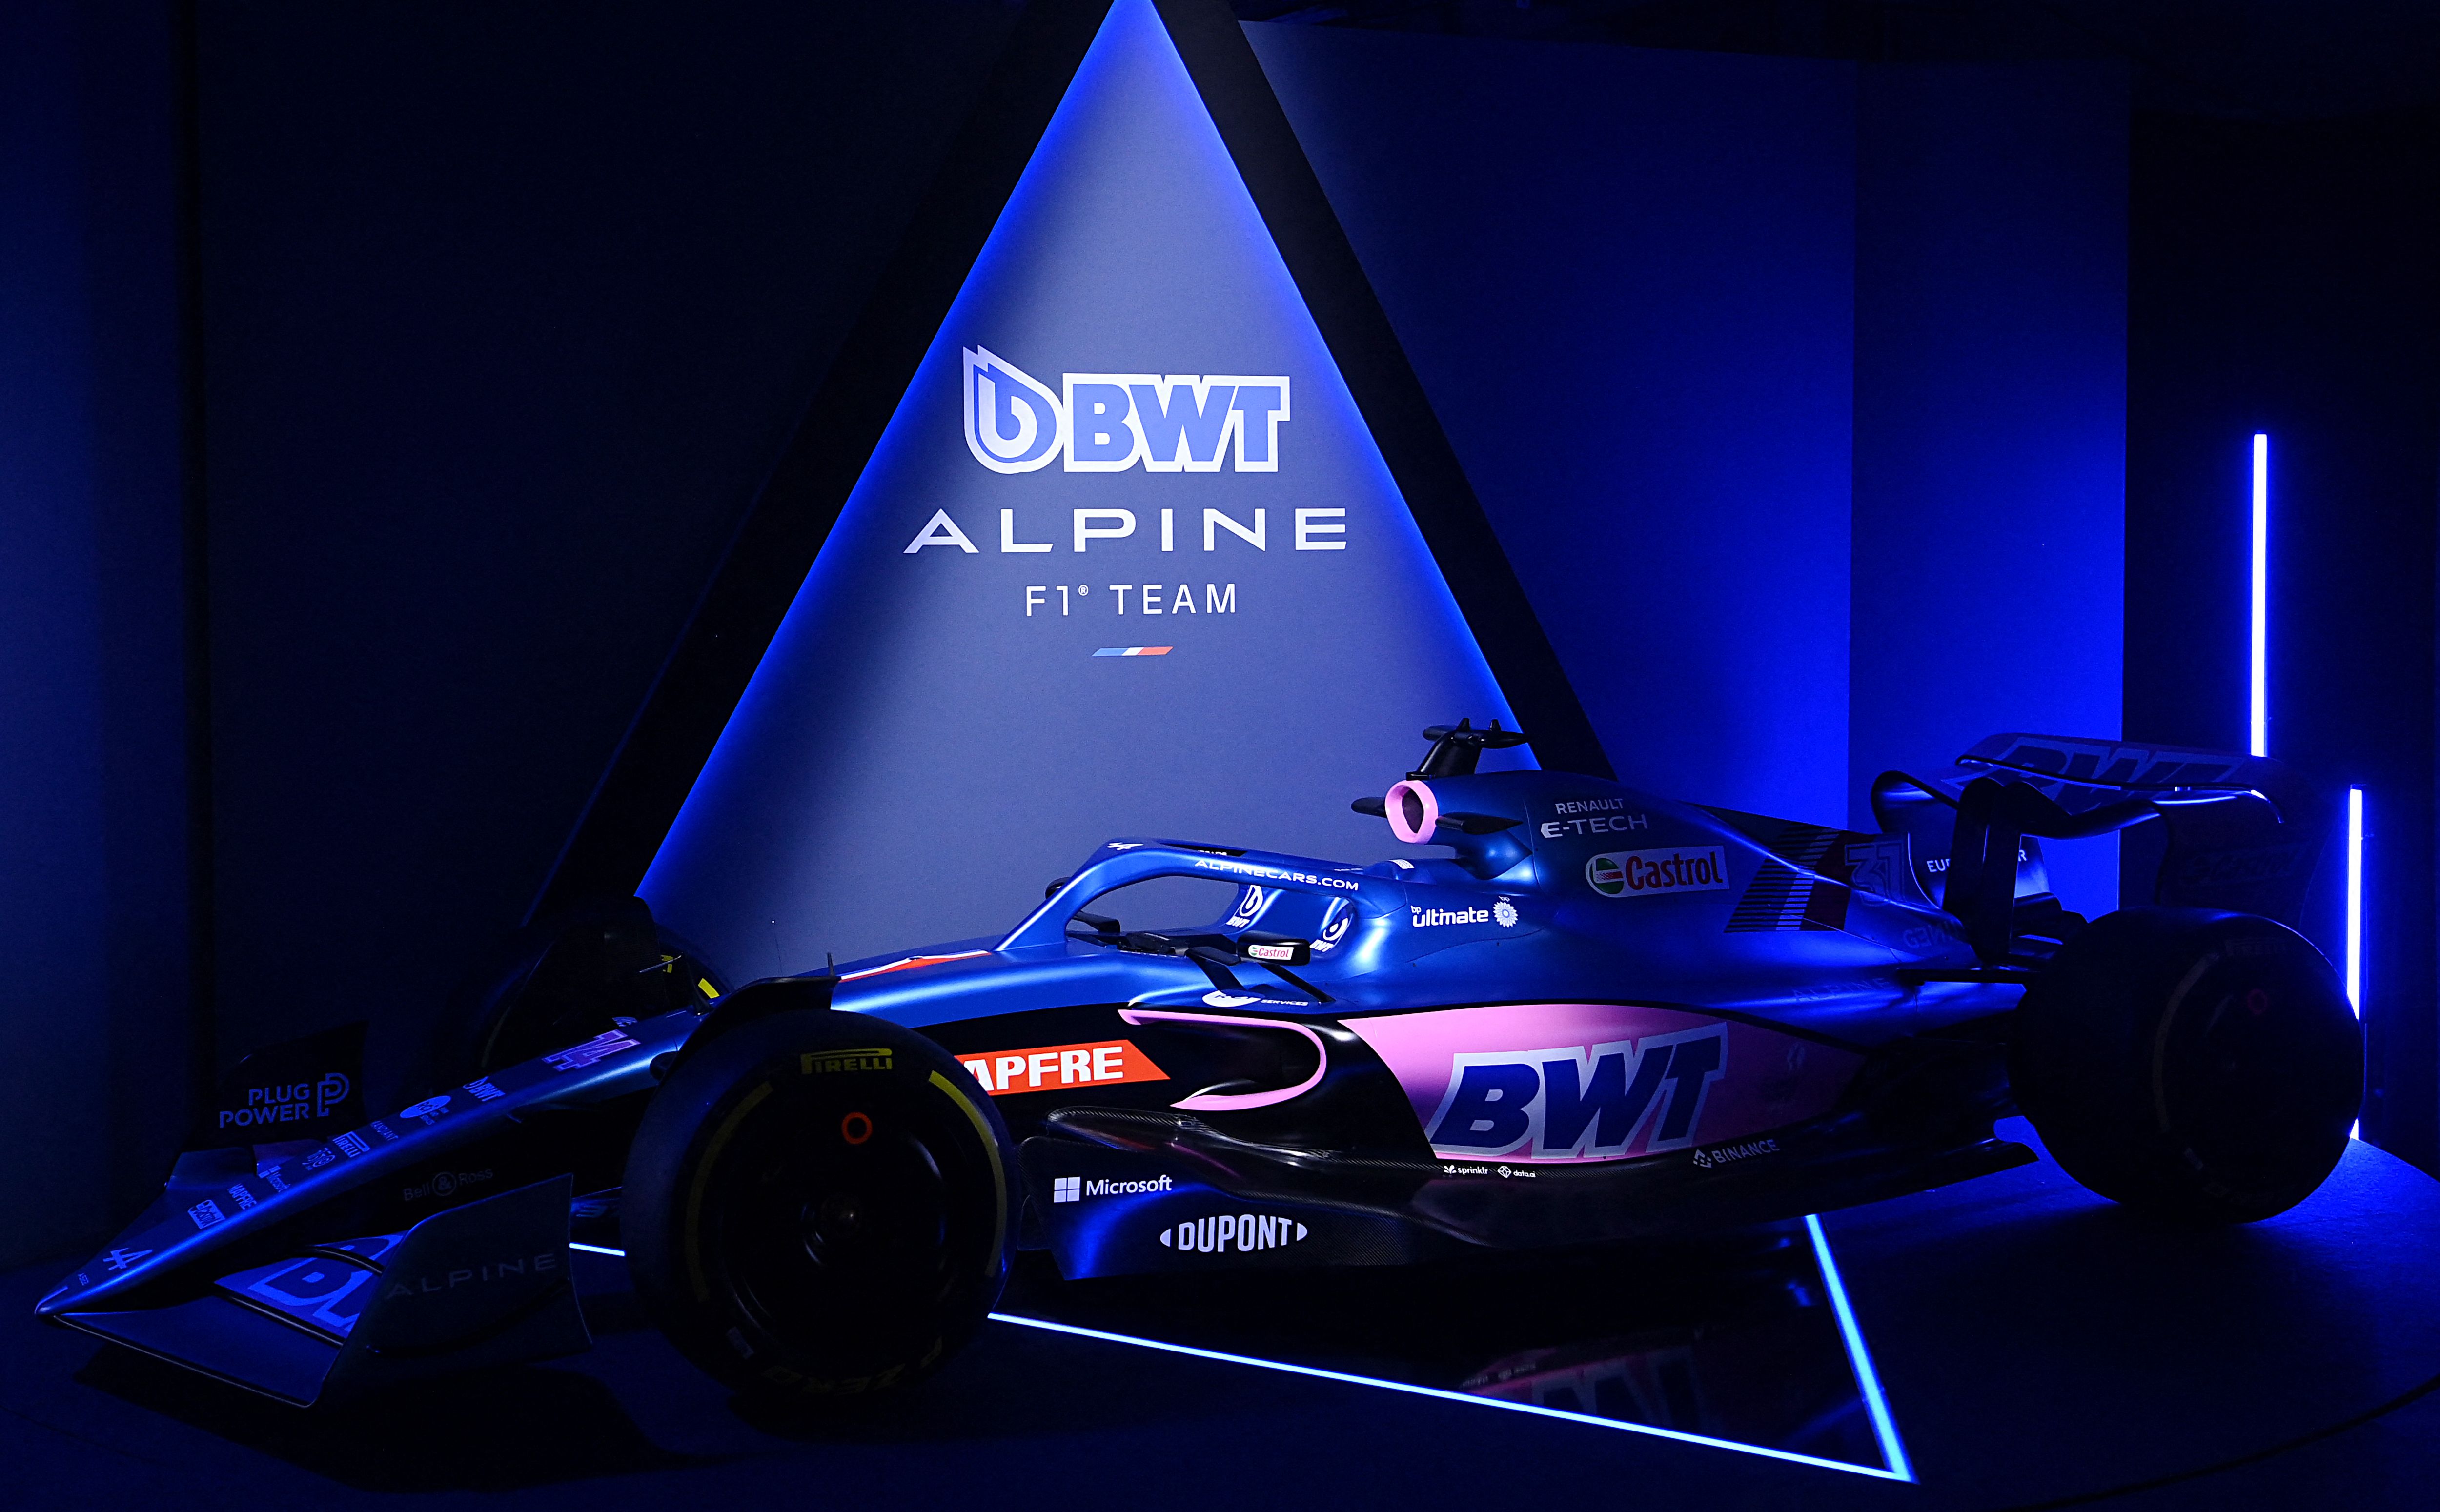 Investment sought by Alpine F1 Team